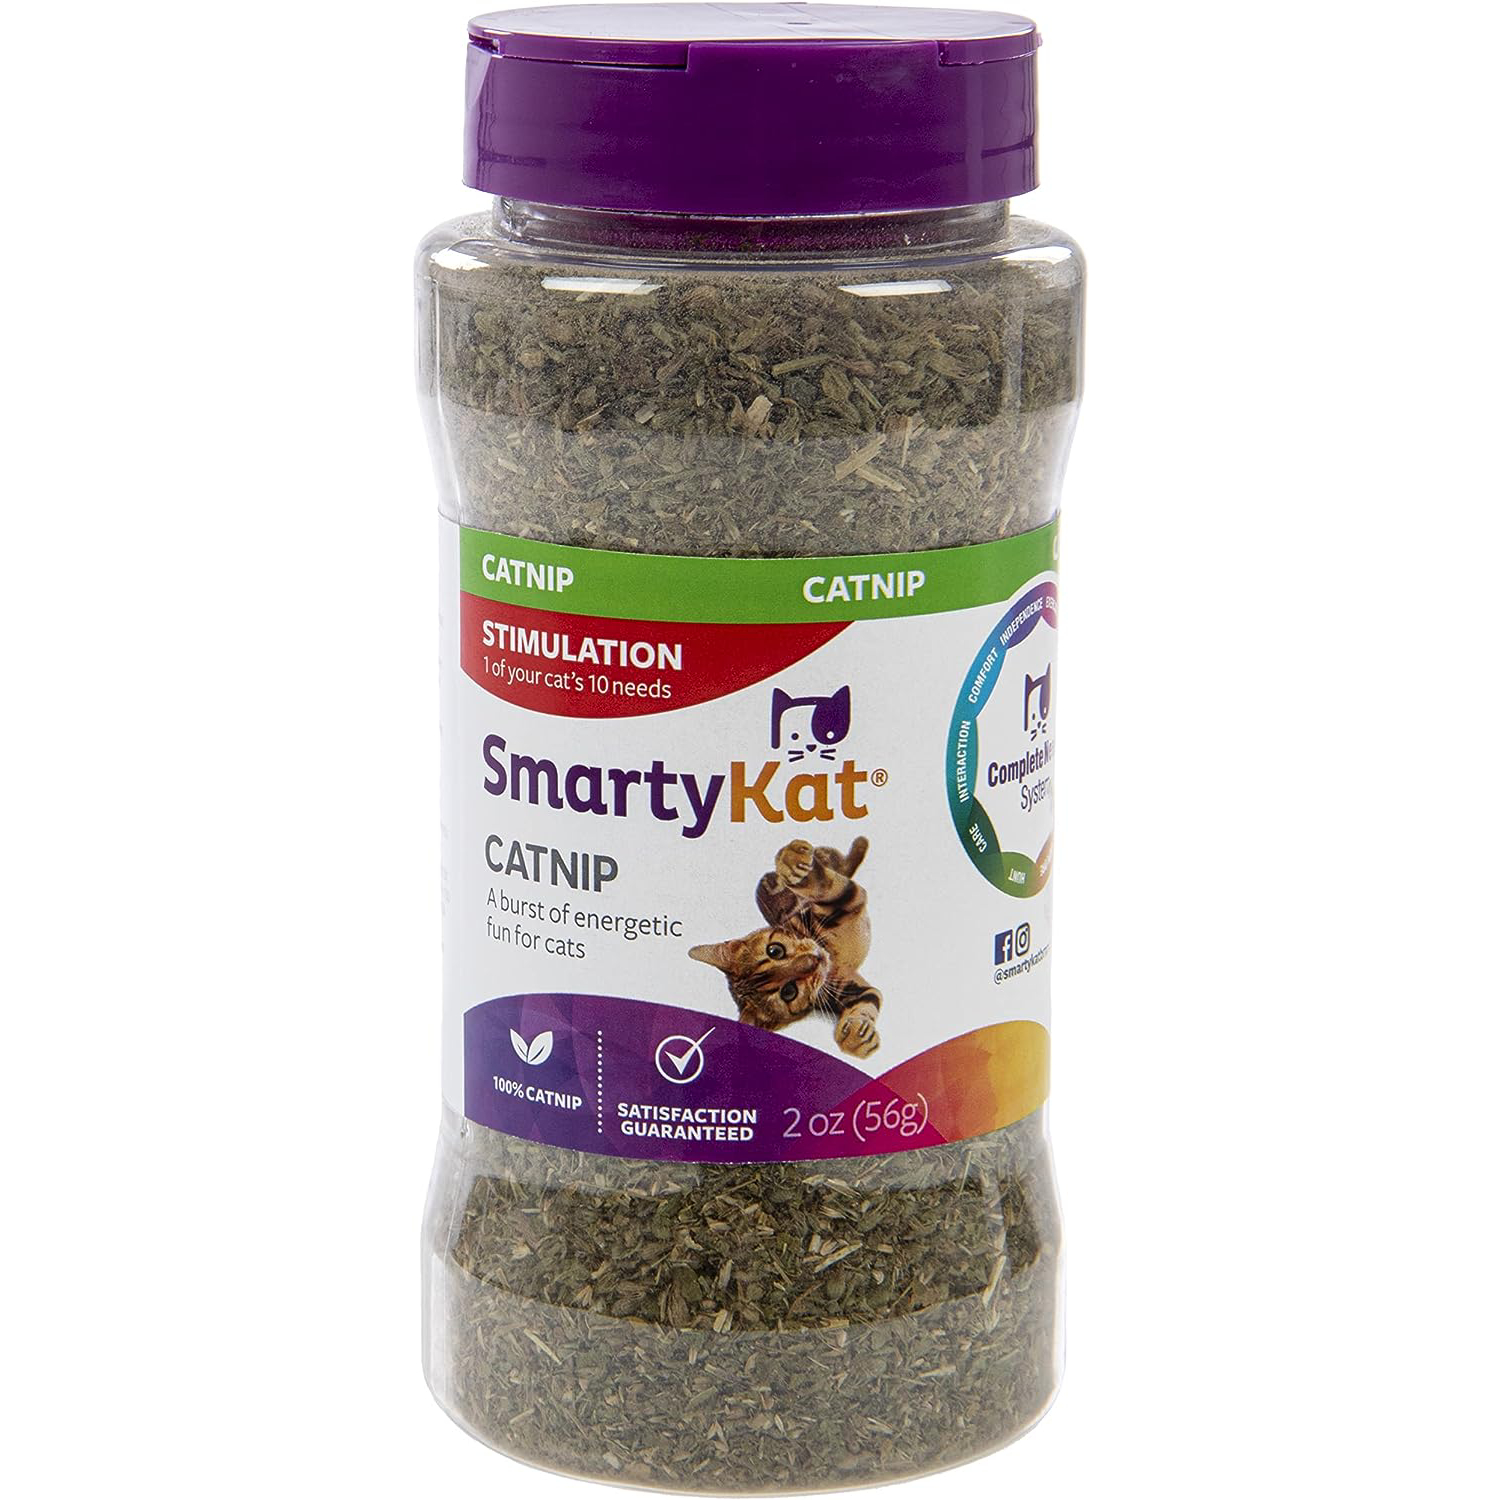 SmartyKat Catnip for Cats & Kittens, Shaker Canister - 2 Ounces New